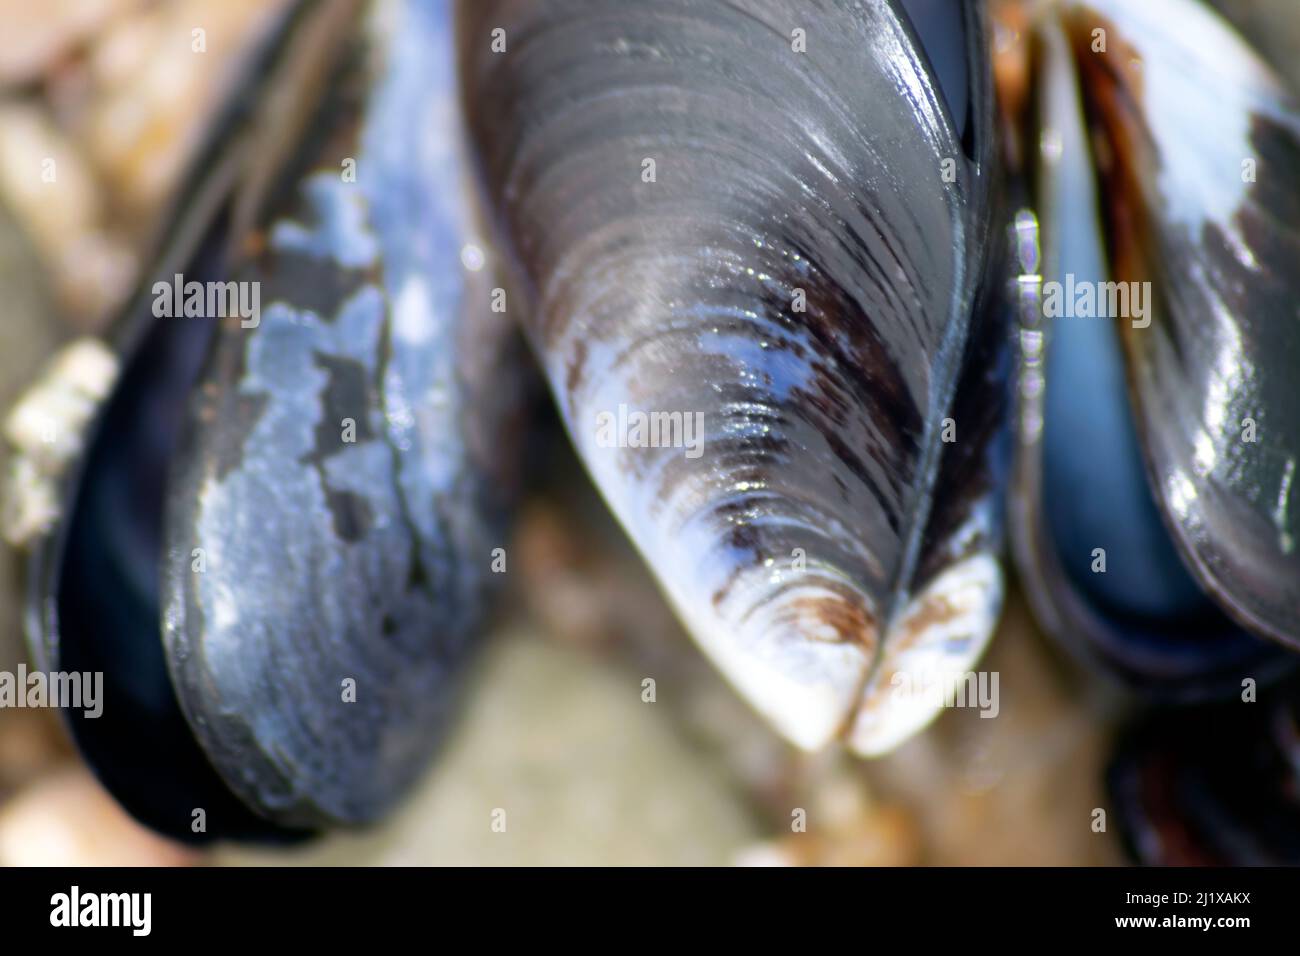 Ocean theme or ocean abstract for wallpaper use or composition. Playa or beach themes with mussels on the sand. Ocean food. Edible molusc Stock Photo